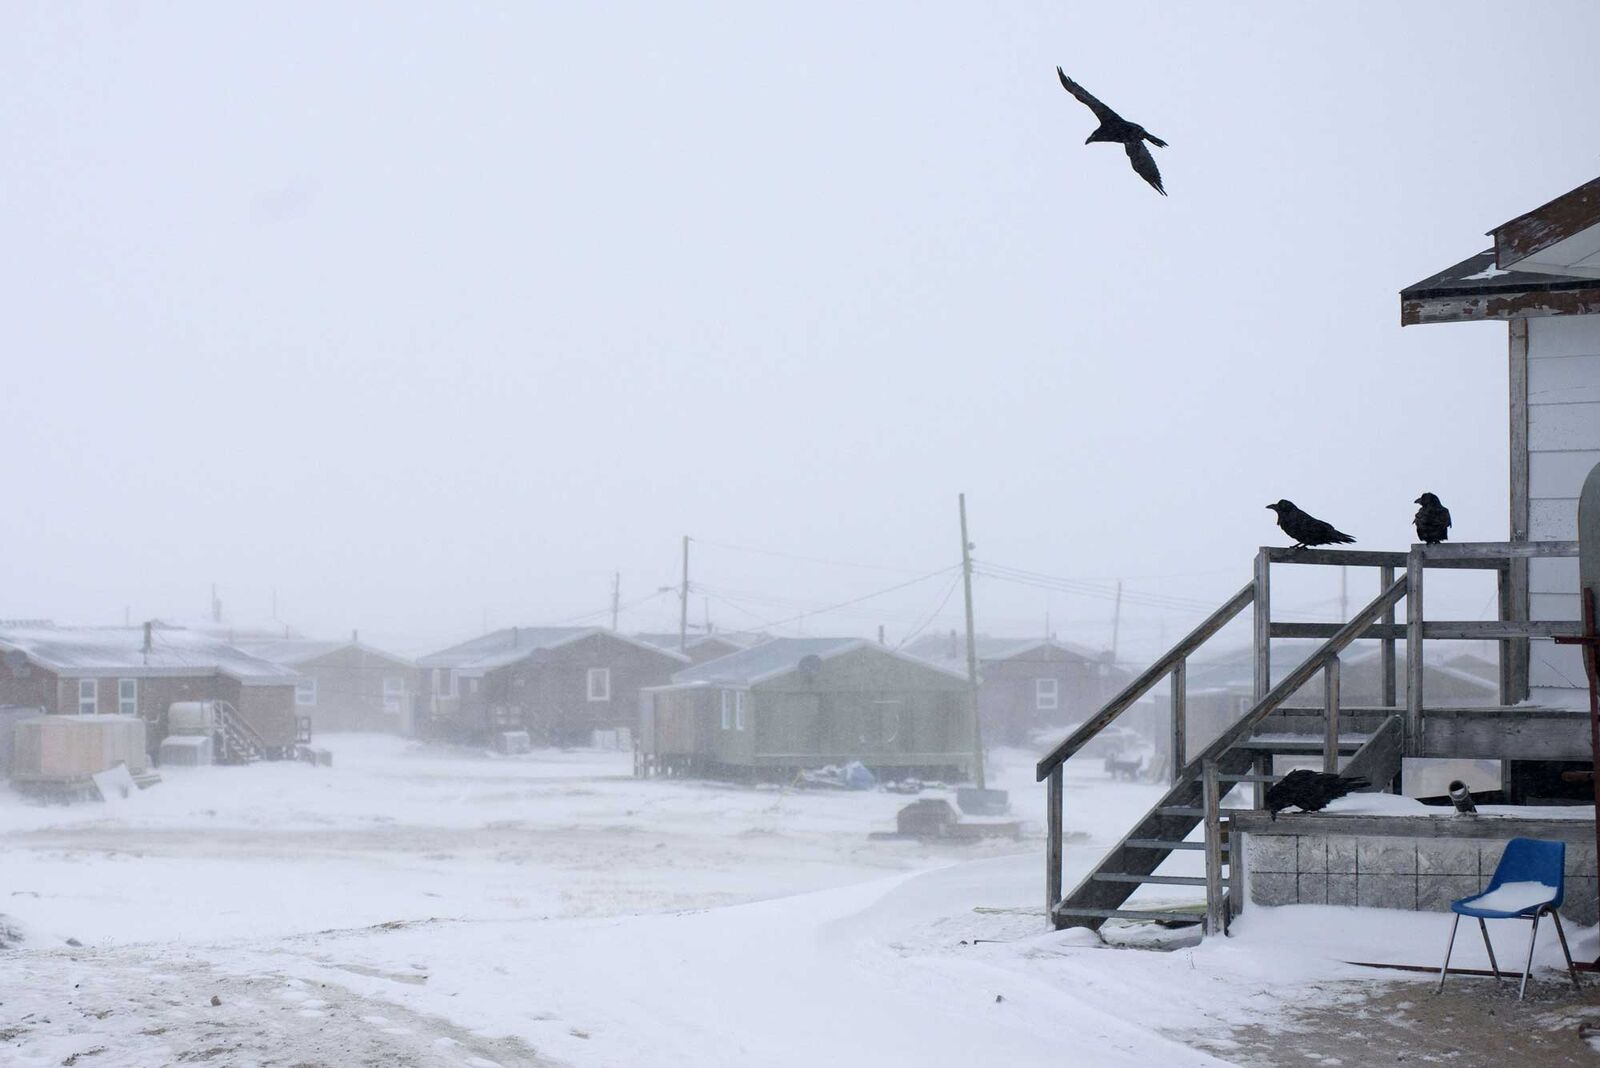 Ravens sit by the stairs of a building, with low buildings and utility poles further off, during a snowstorm in Clyde River, Nunavut, in Canada in 2016.